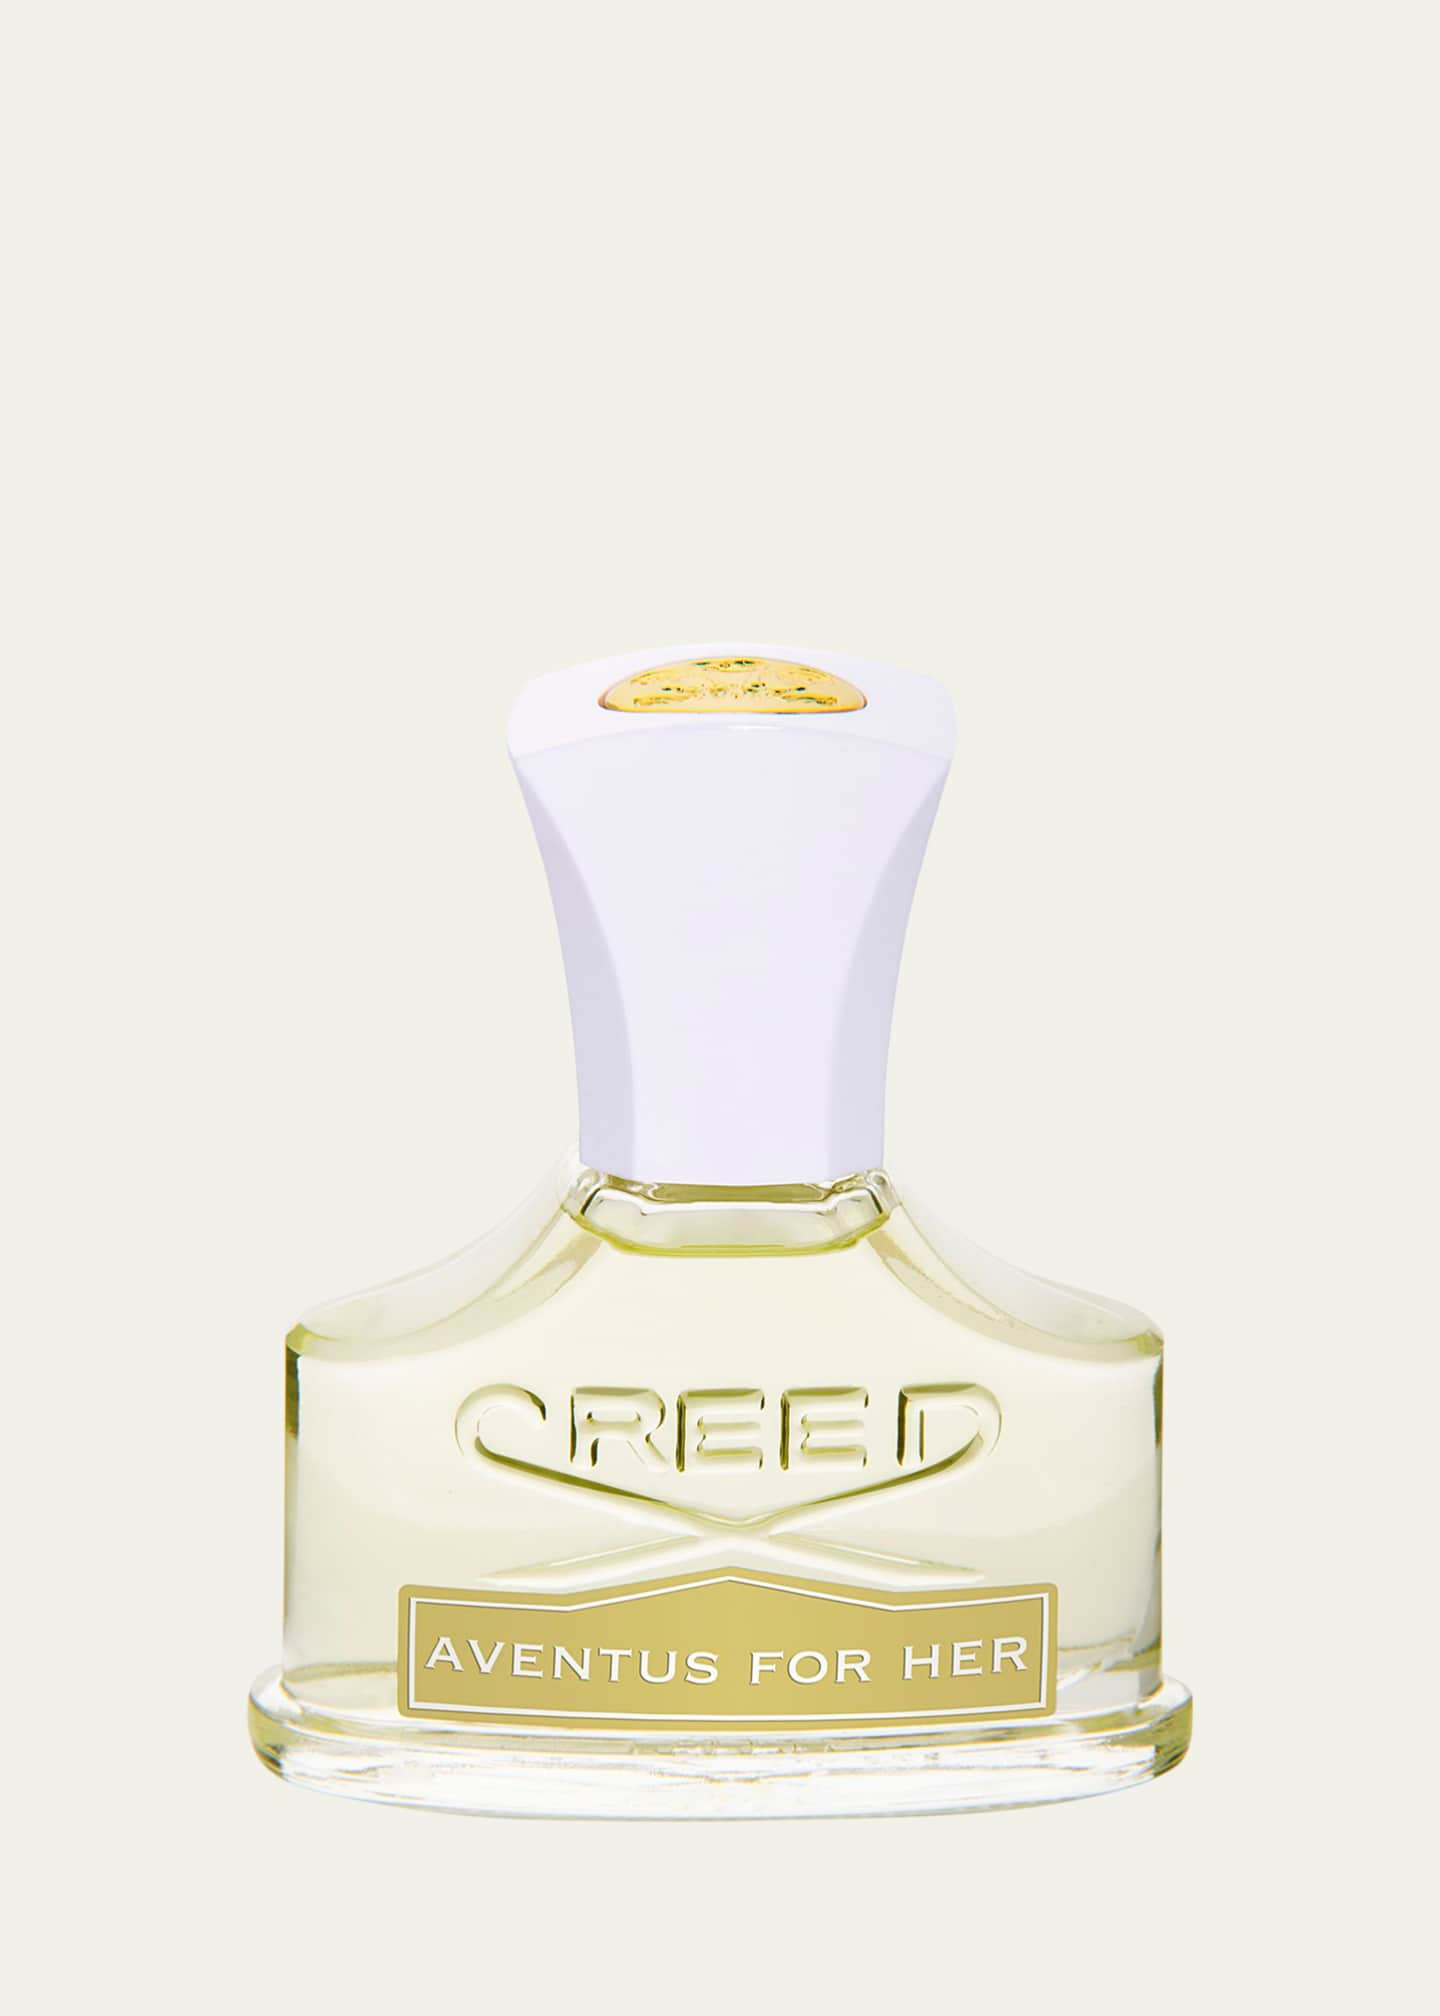 CREED Aventus for Her, 1.0 oz. Image 1 of 2